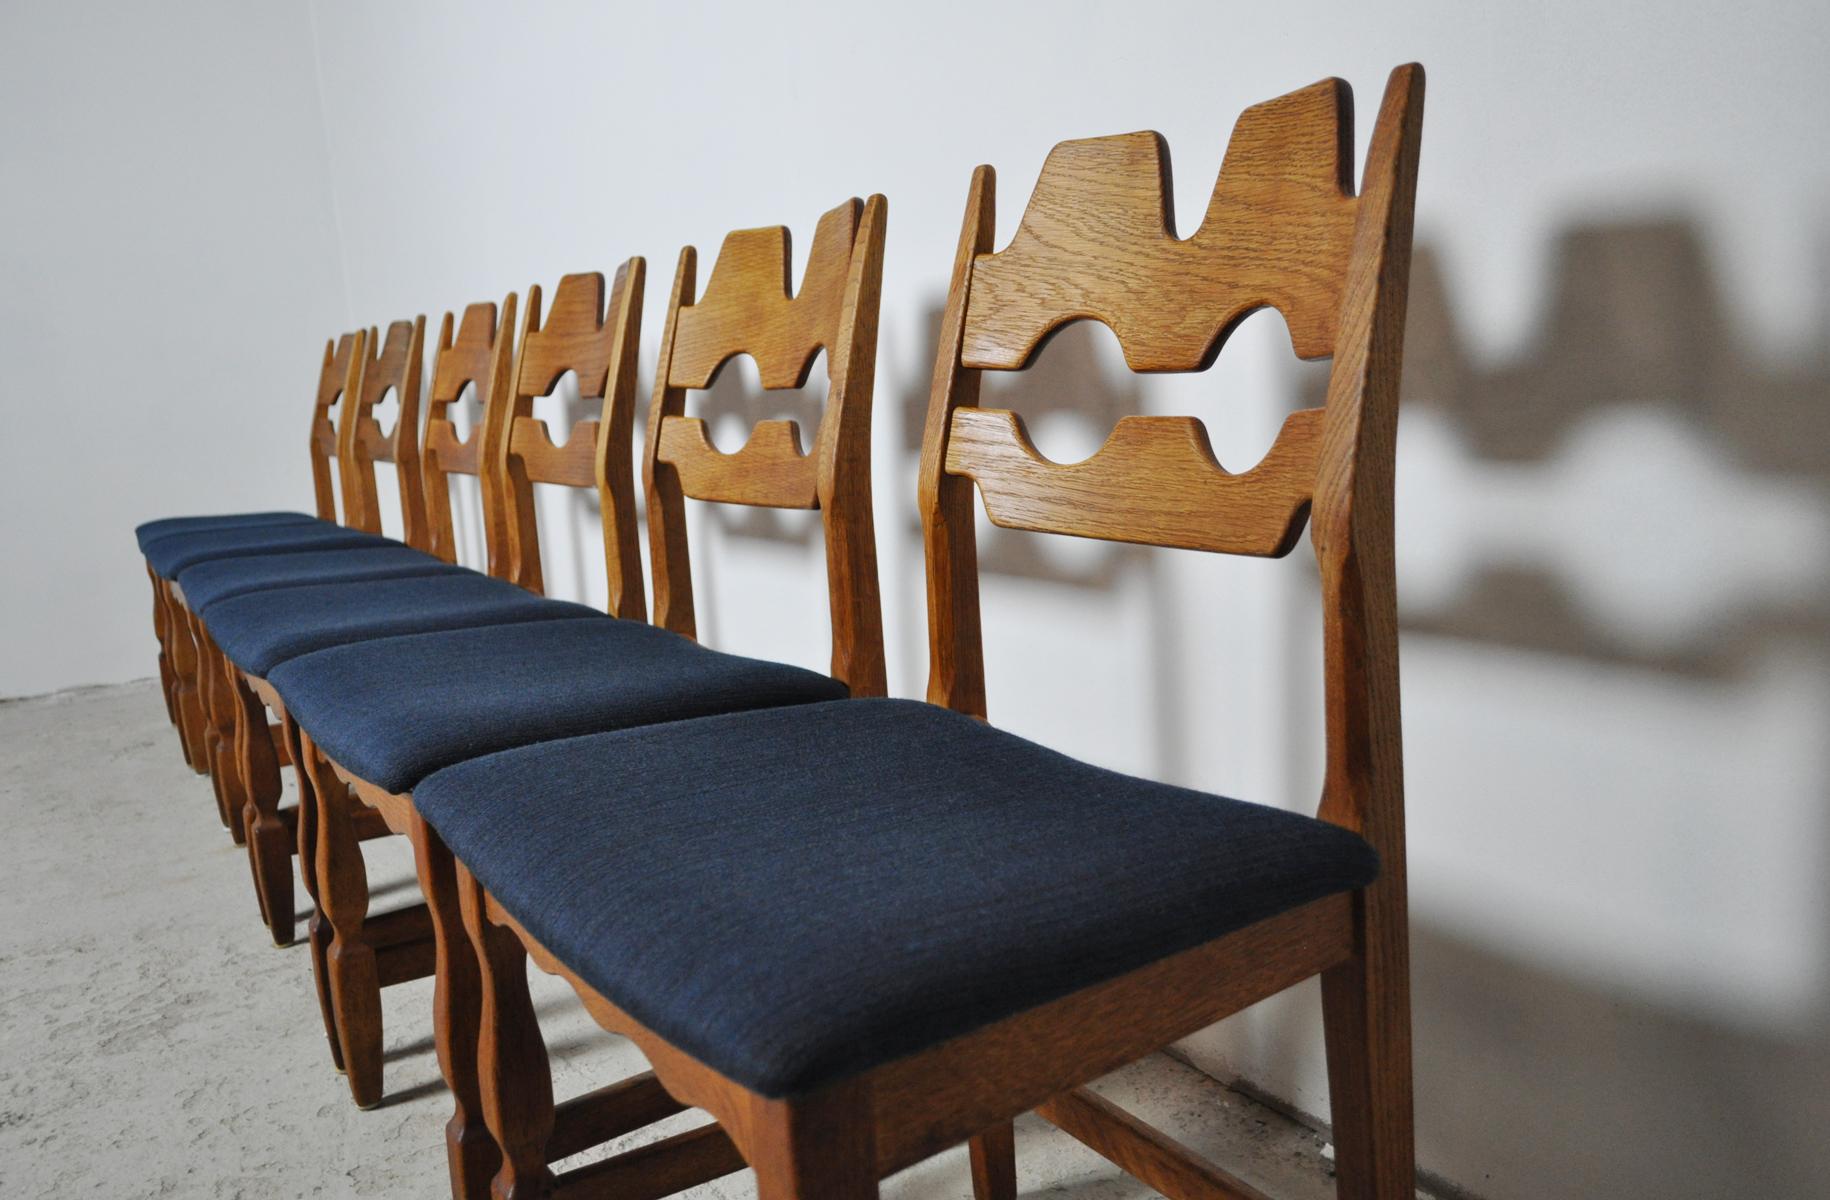 8 Dining chairs designed by Henning Kjærnulf, made of solid oak. 

A design where rustic meets modernism design. Gently refurbished solid oak with a beautiful grain. These chairs are manufactured by Nyrup Møbelfabrik, Denmark. Nyrup Møbelfabrik